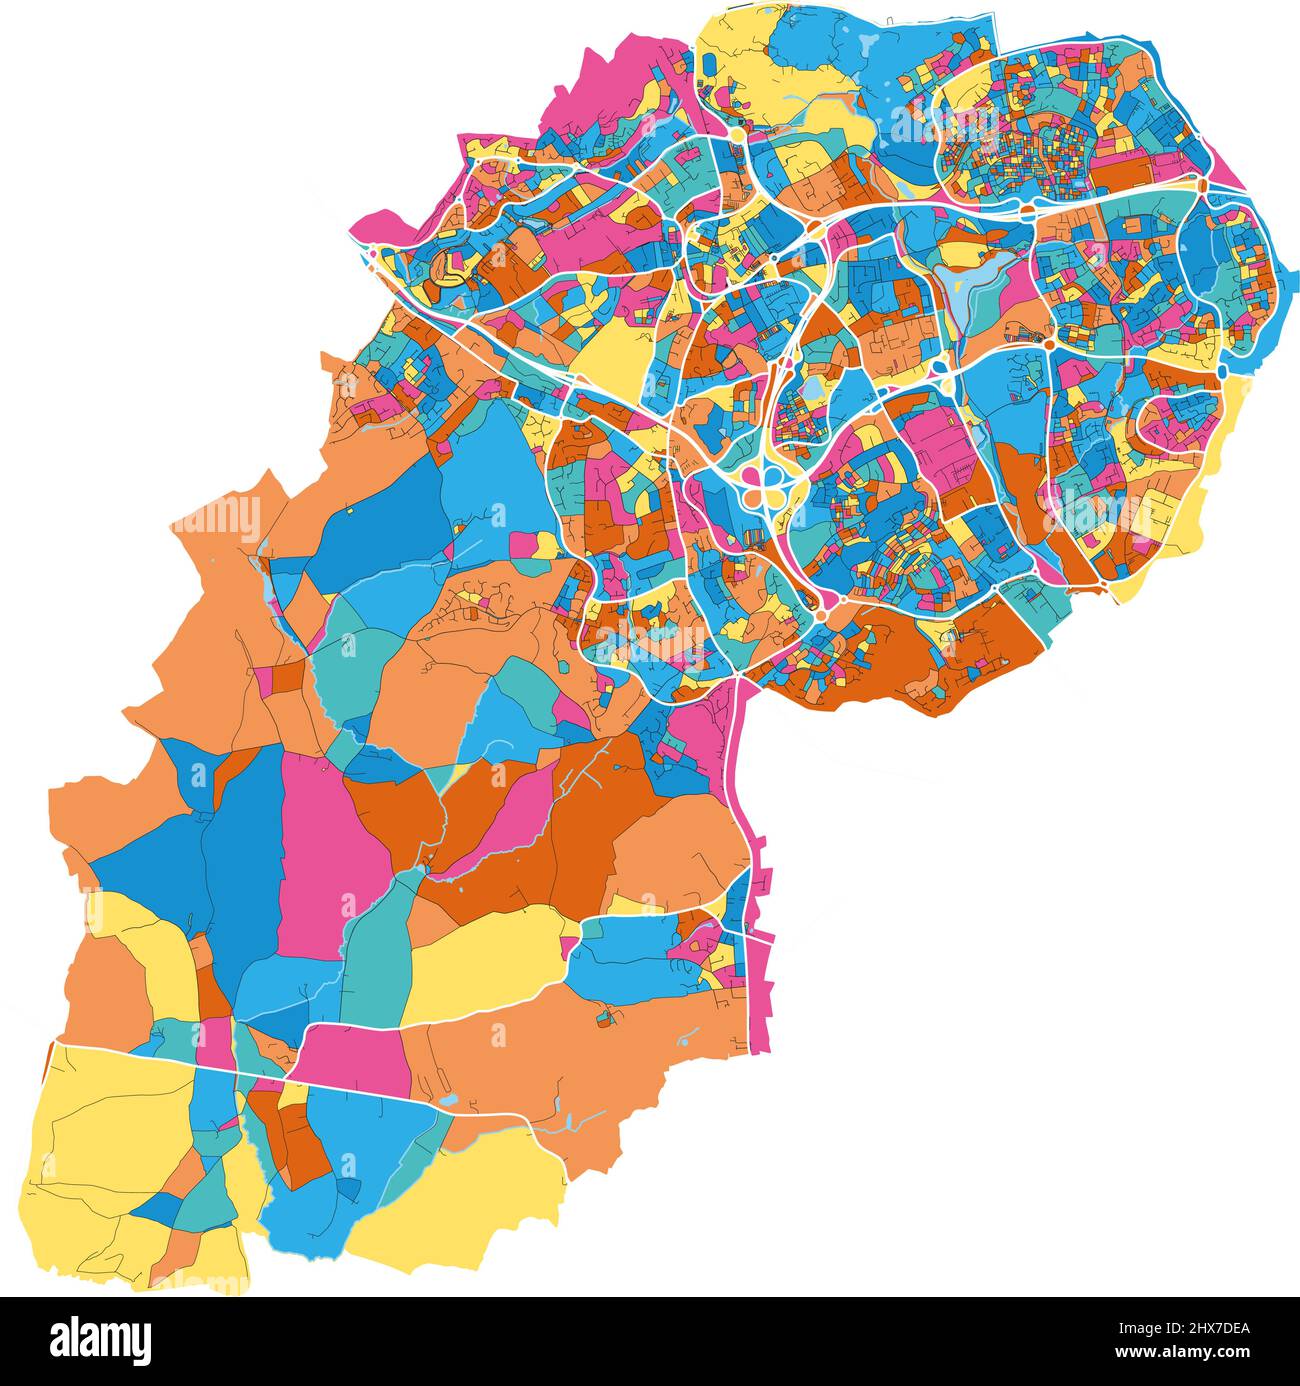 Redditch, West Midlands, England colorful high resolution vector art map with city boundaries. White outlines for main roads. Many details. Blue shape Stock Vector